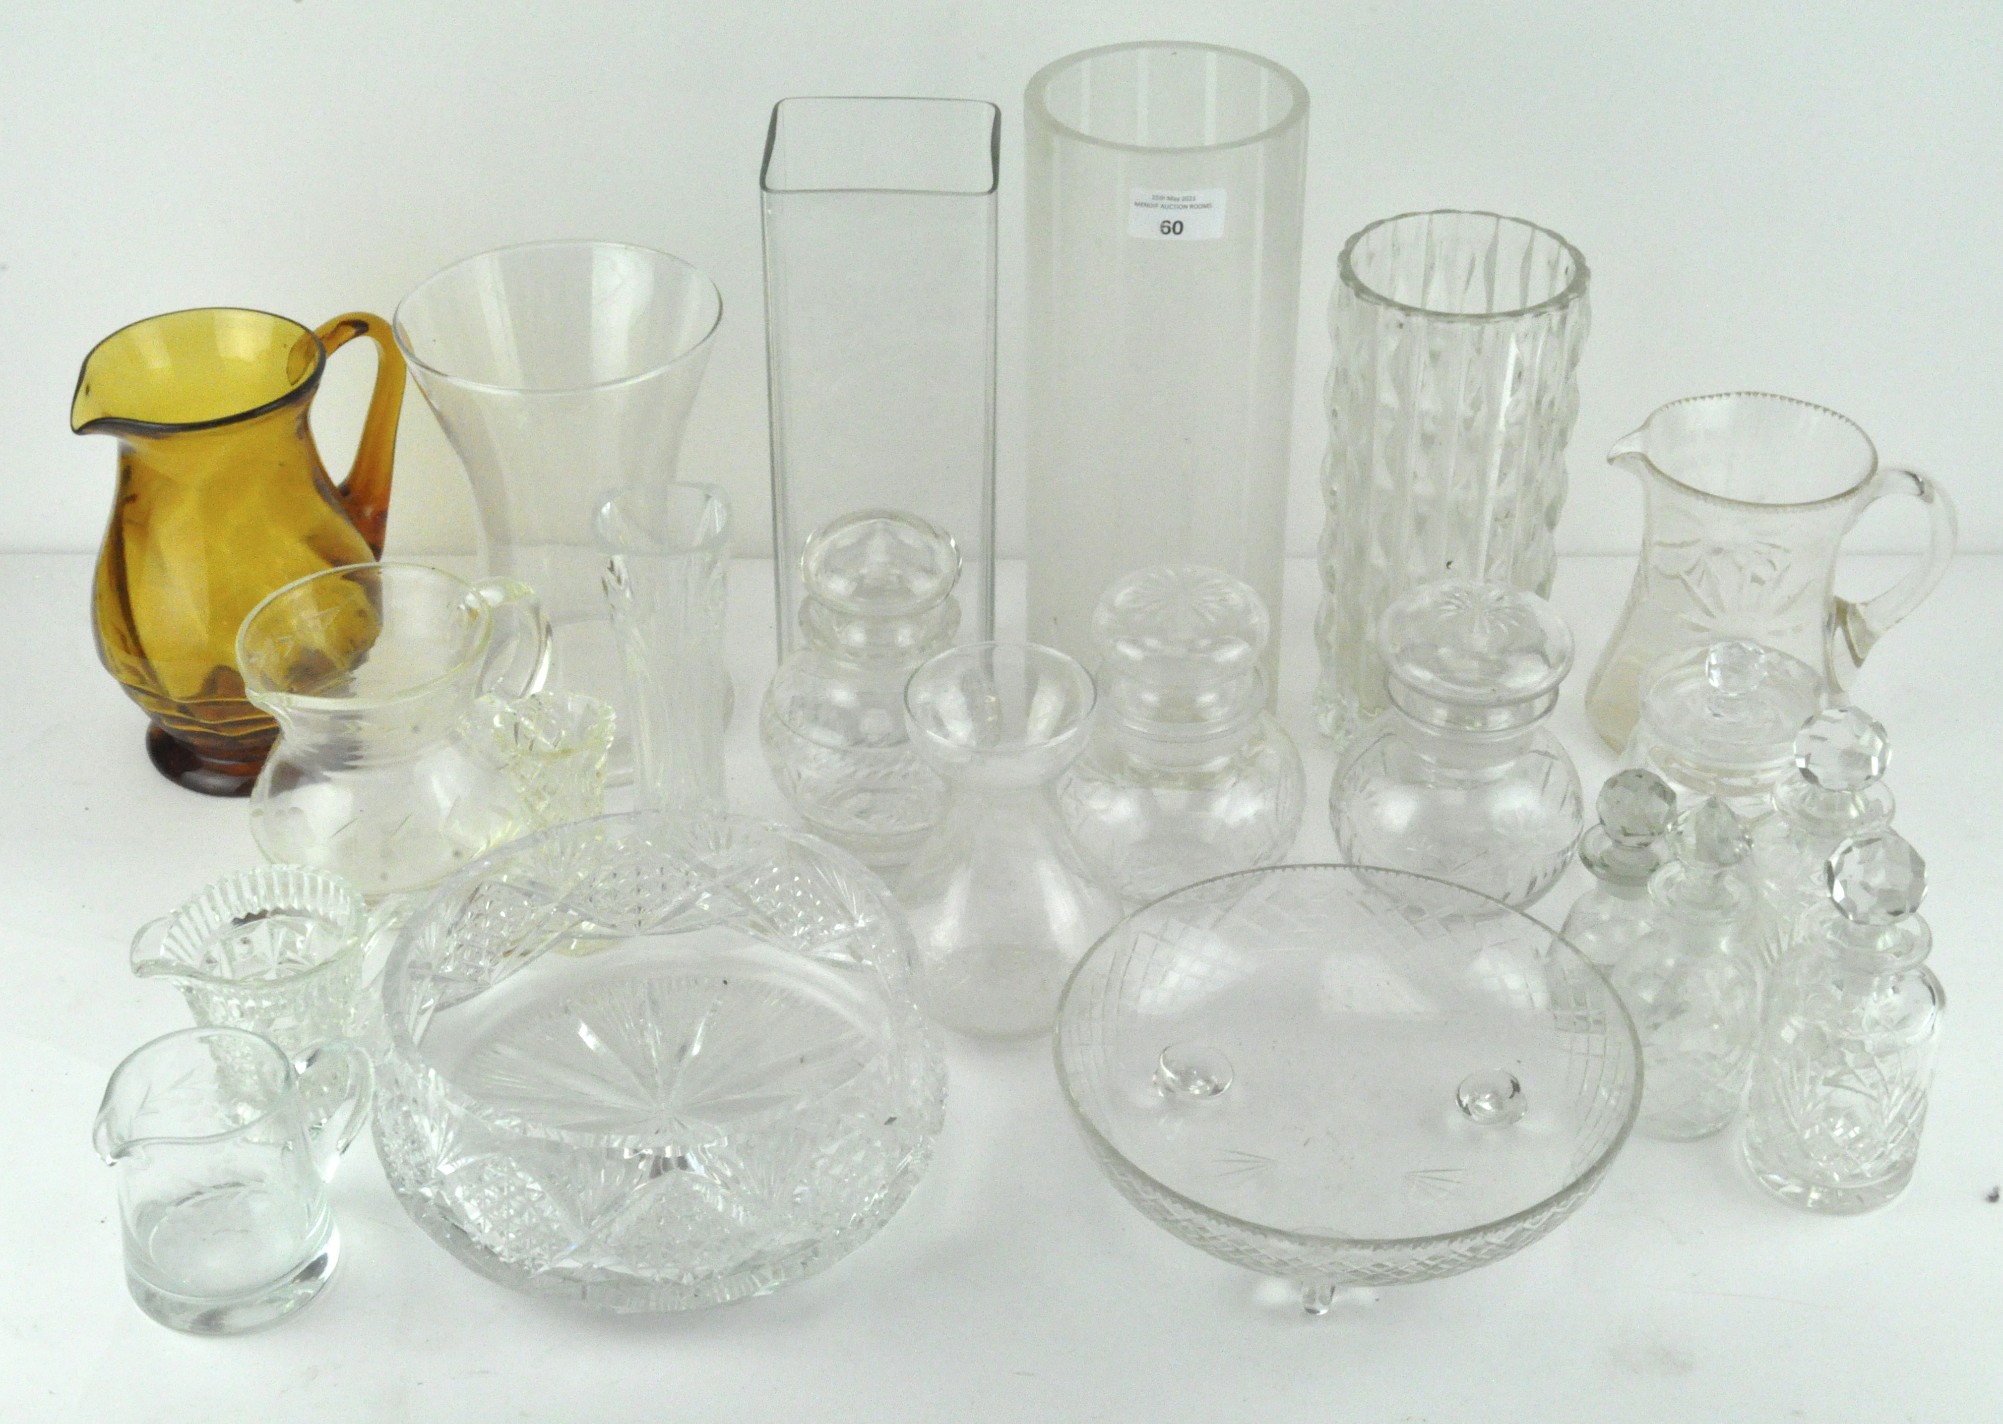 A collection of assorted cut glass and other glassware, including bowls jugs and vases. - Image 2 of 2